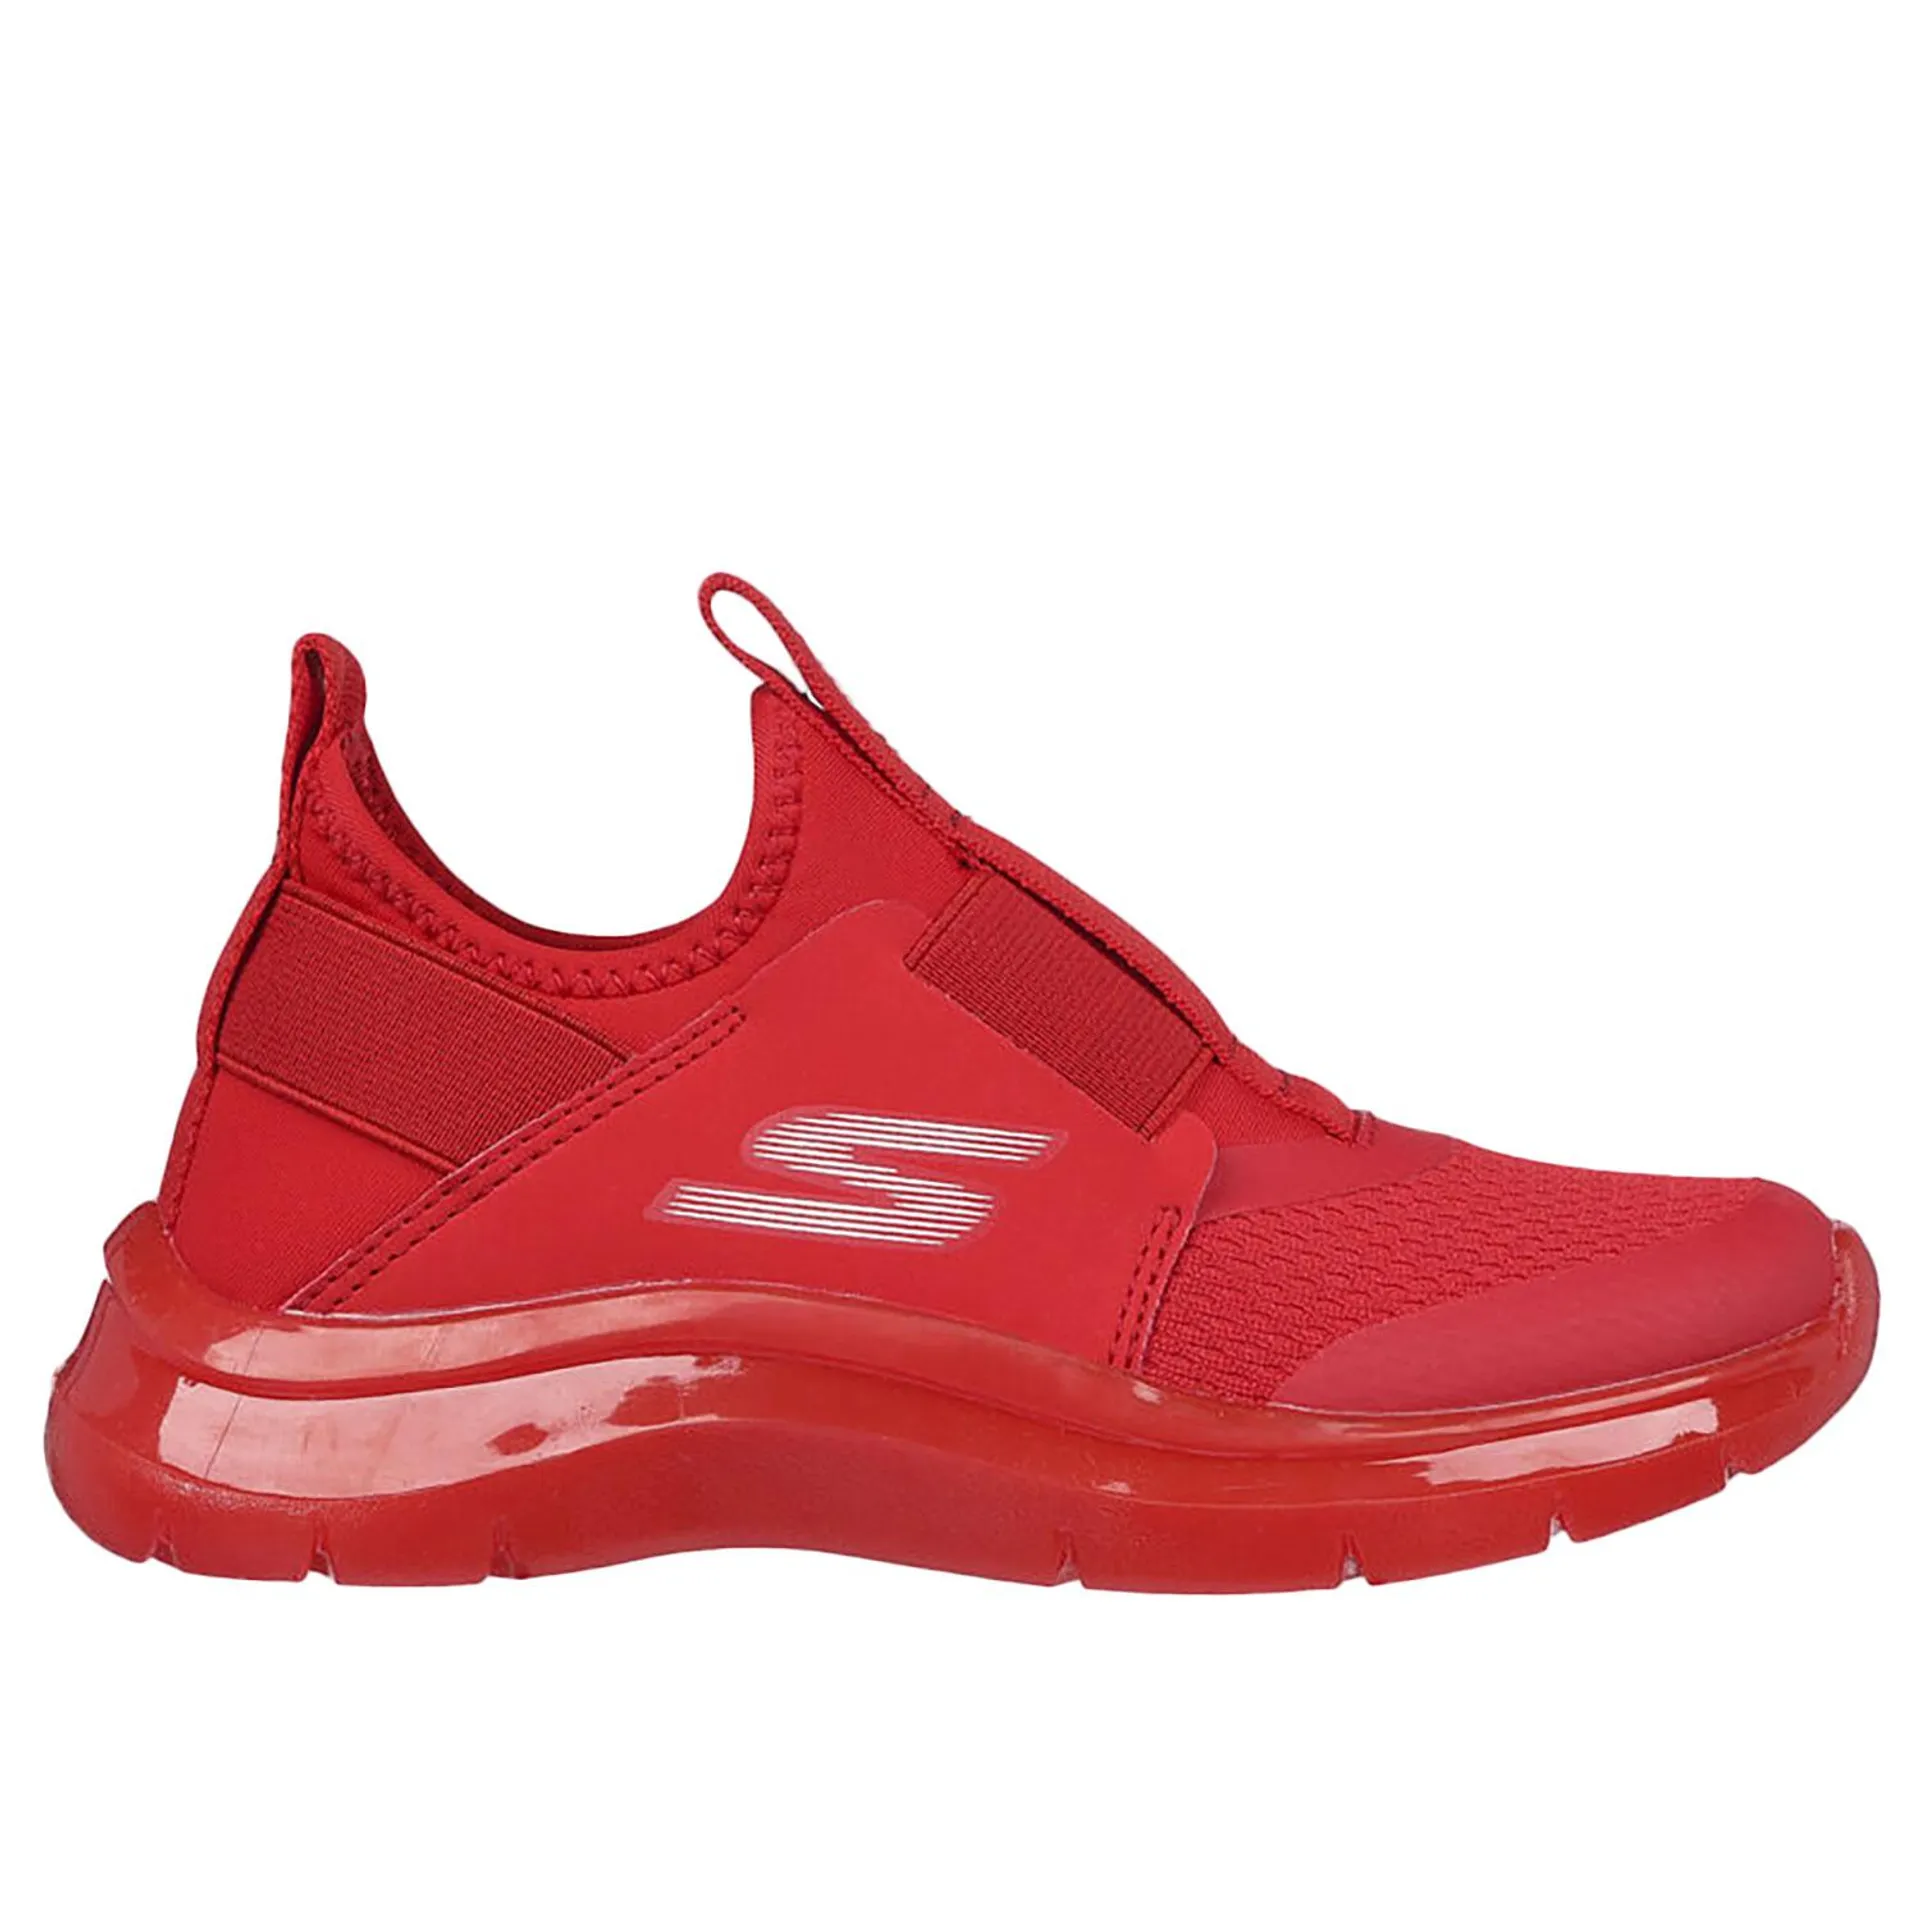 Skechers Skech Fast Ice Boys' Athletic Shoes